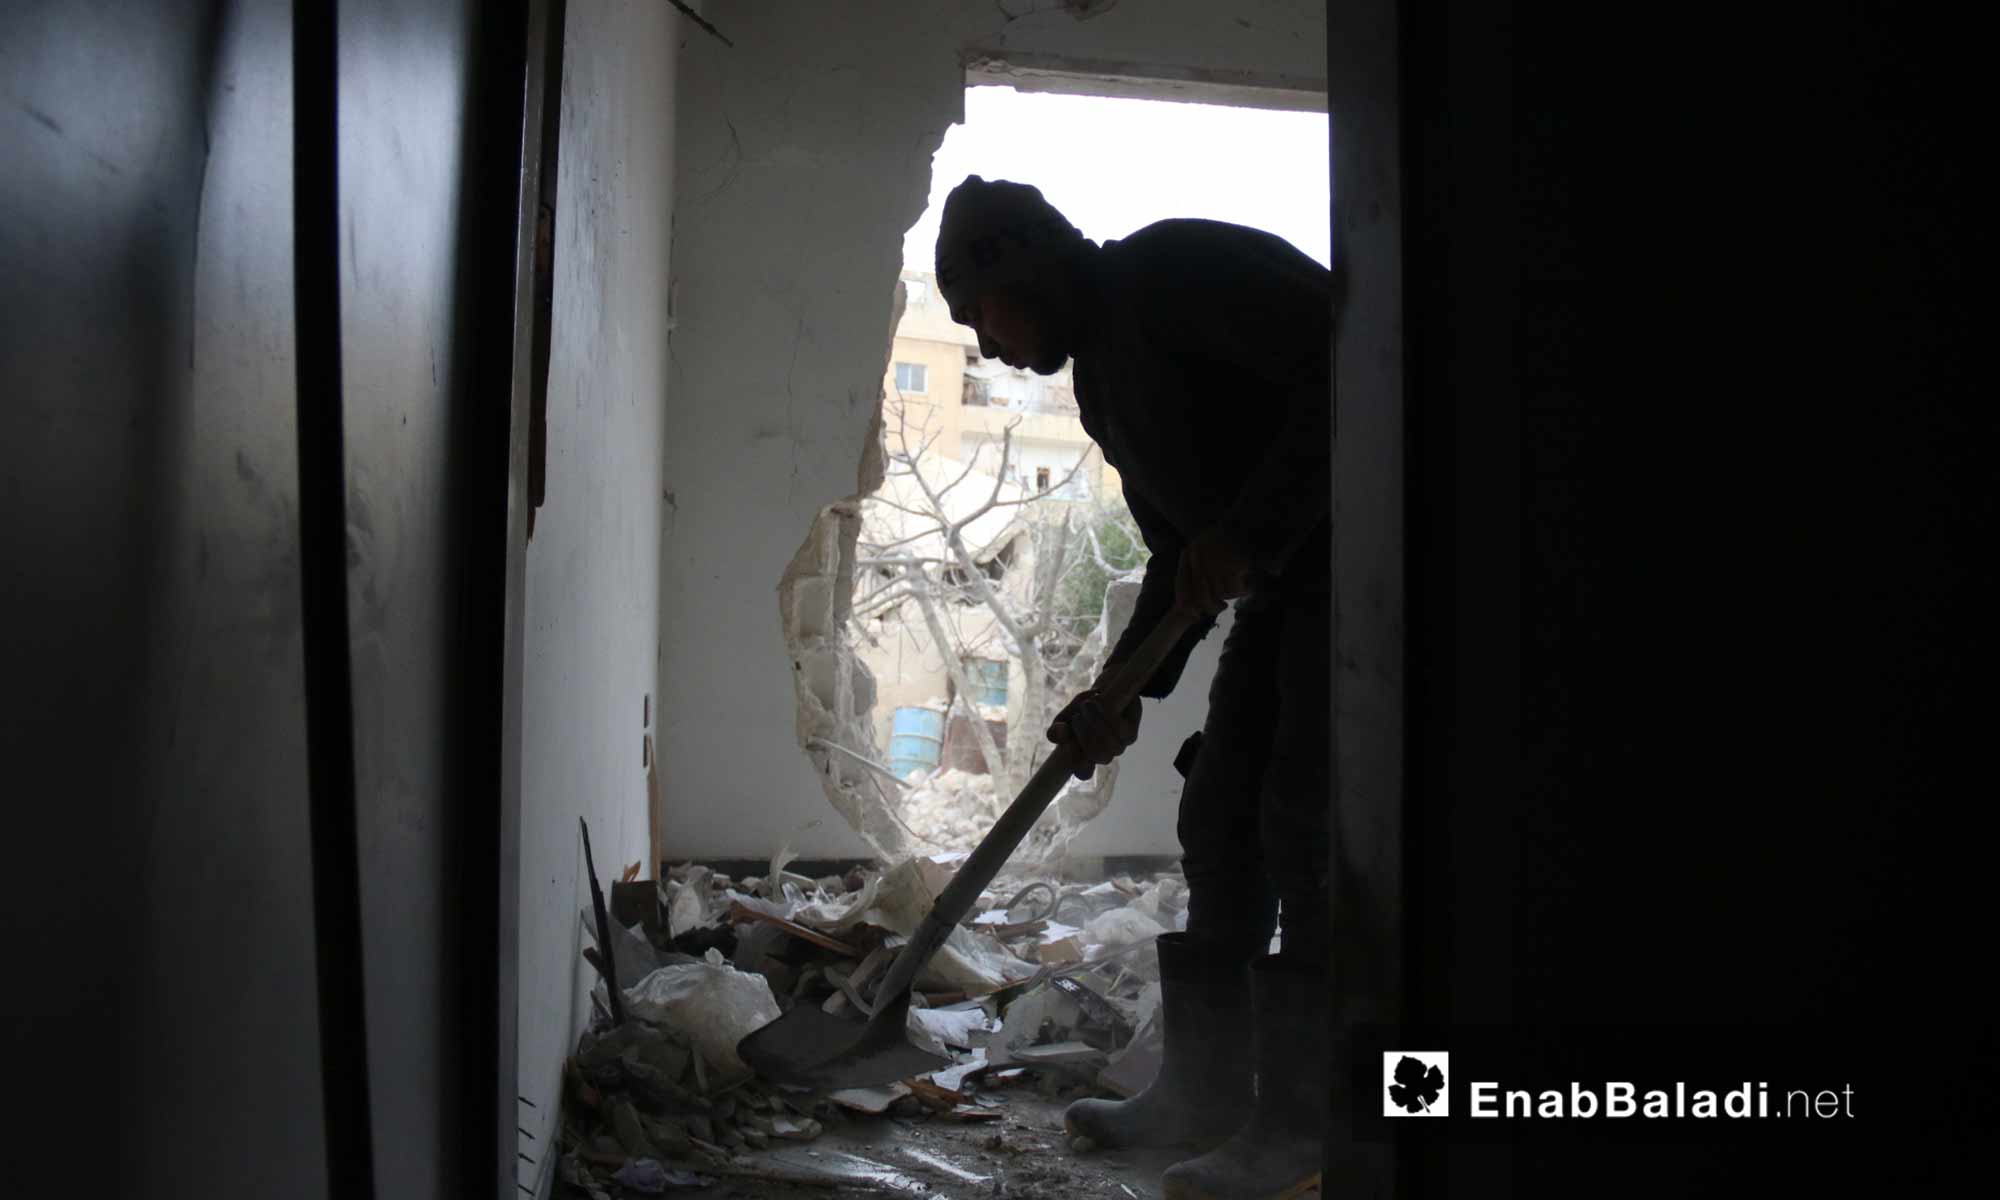 The effects of the Russian shelling of residential neighborhoods in the center of Idlib city – March 14, 2019 (Enab Baladi)